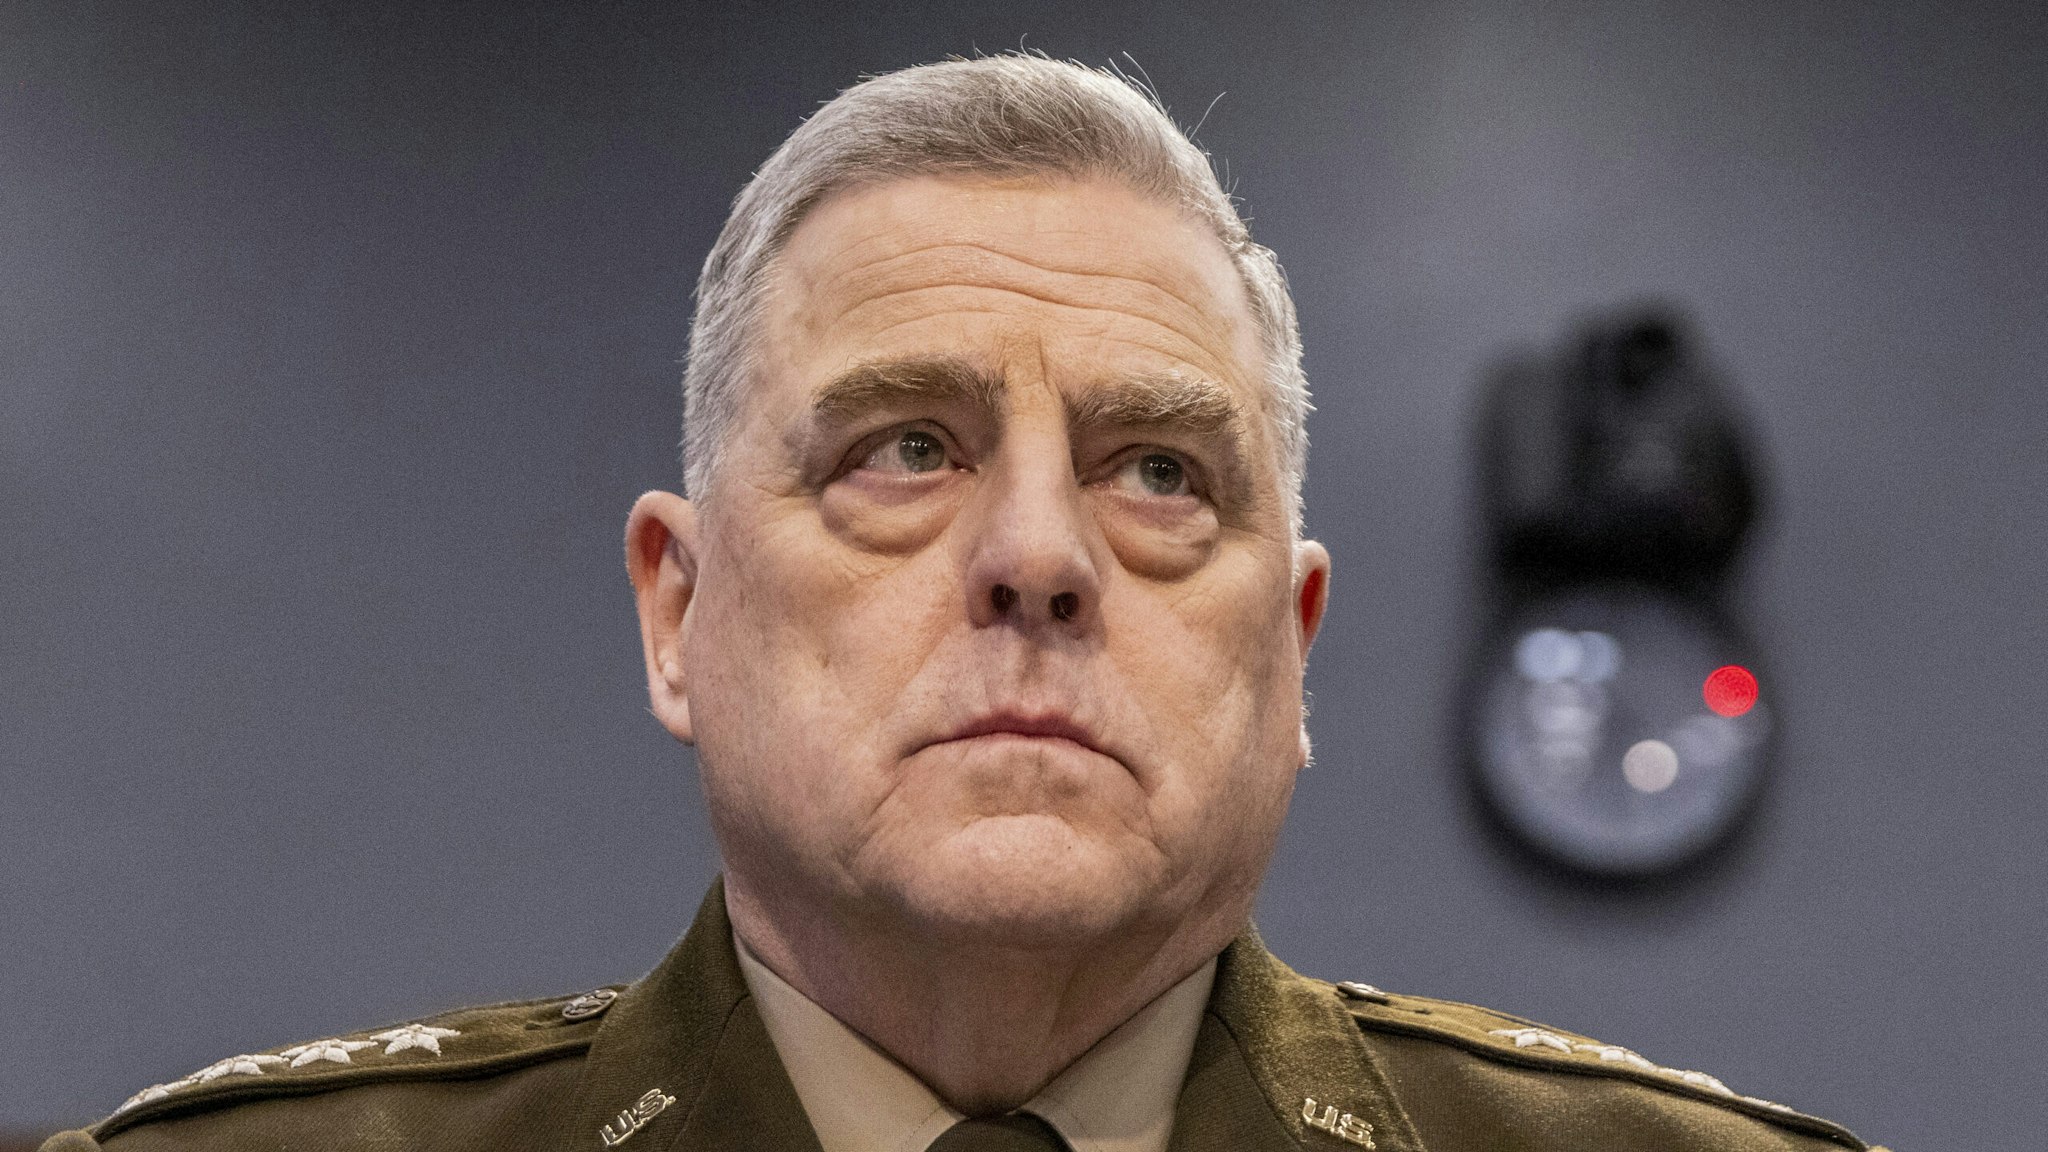 WASHINGTON, DC - MAY 11: General Mark Milley during testimony on May 11, 2022 in Washington, DC. Defense Subcommittee hearing on "FY2023 Department of Defense spending in the upcoming year.